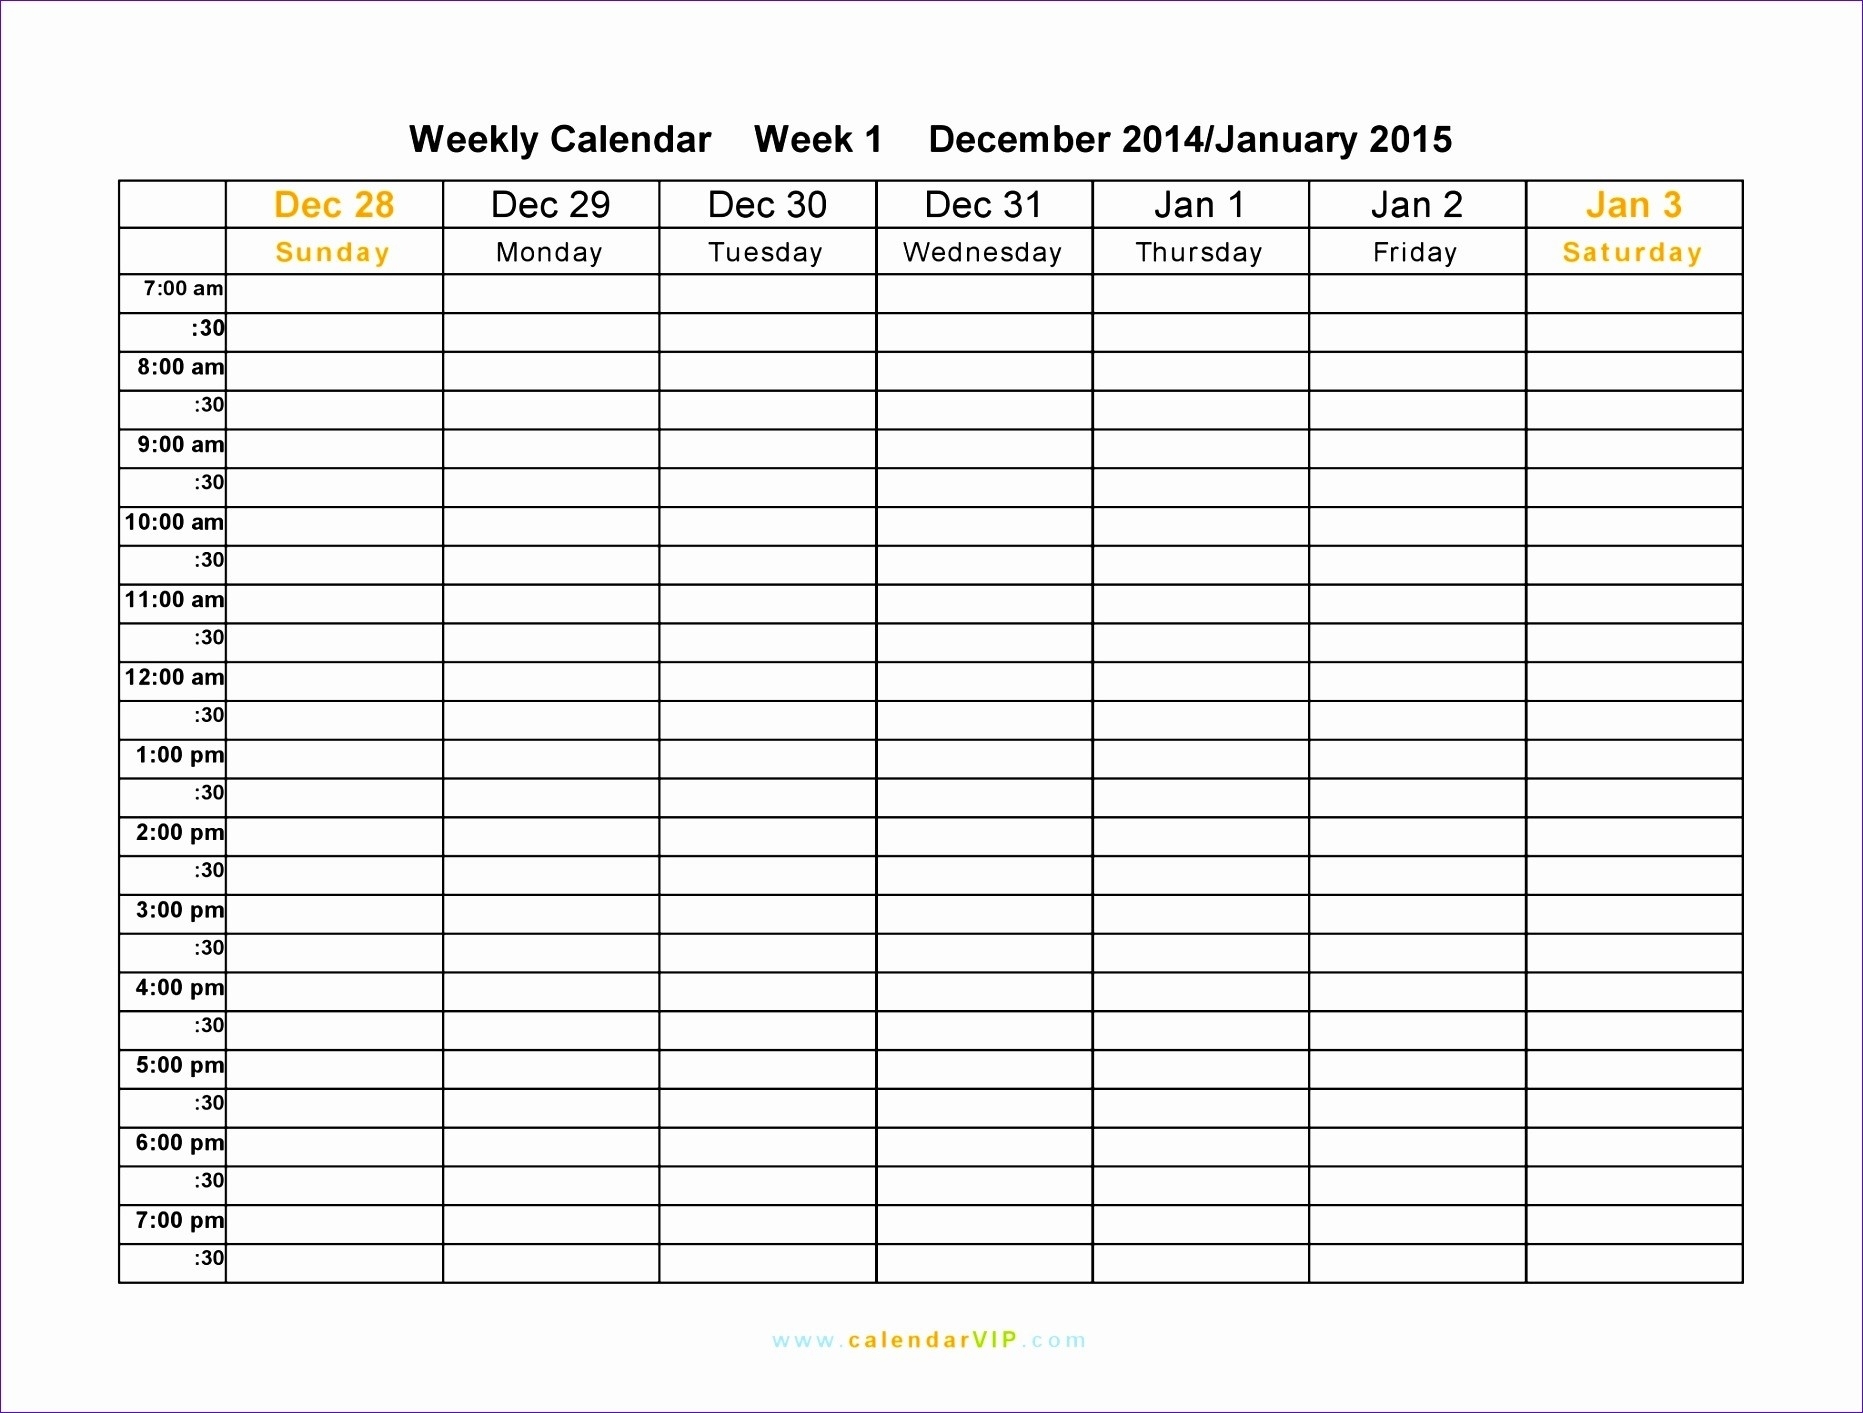 Schedule Worksheet Templates | Printable Worksheets And for Printable 15 Min. Appointment Sheet 8-6